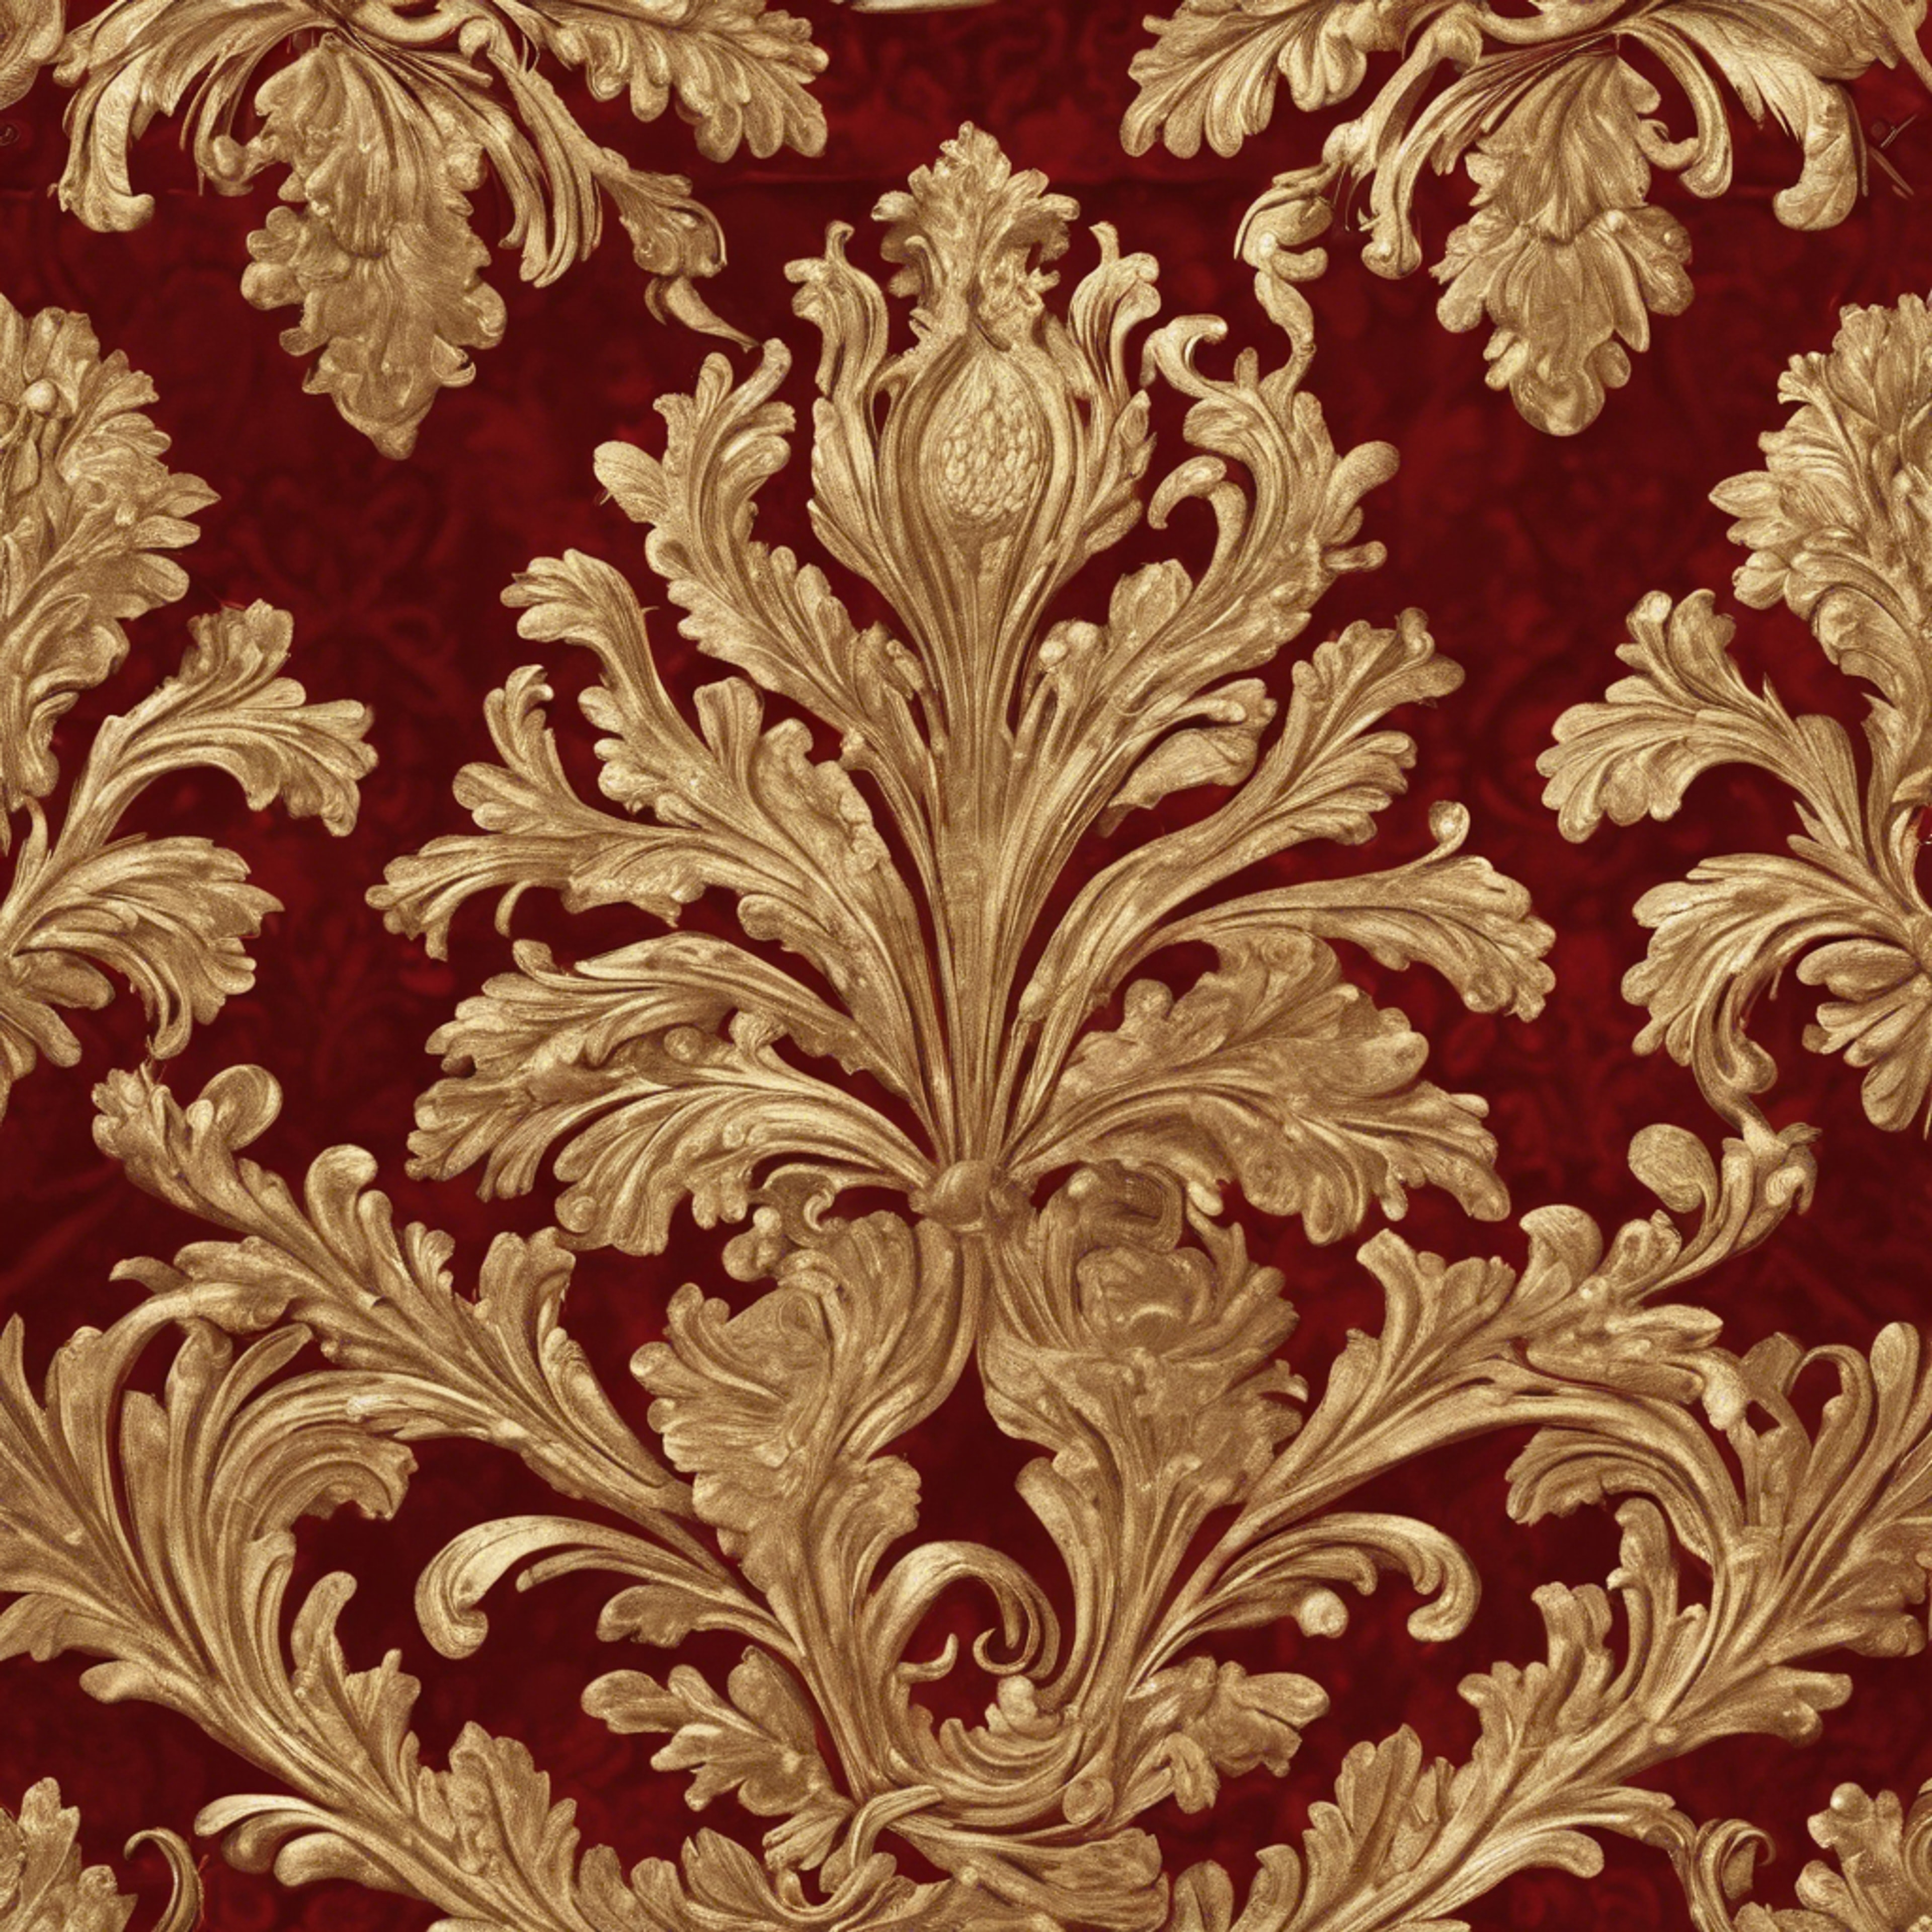 A dramatic seamless design of antique gold damask on a canvas of cardinal red velvet. Tapeta[ac0bd922427a4985975e]